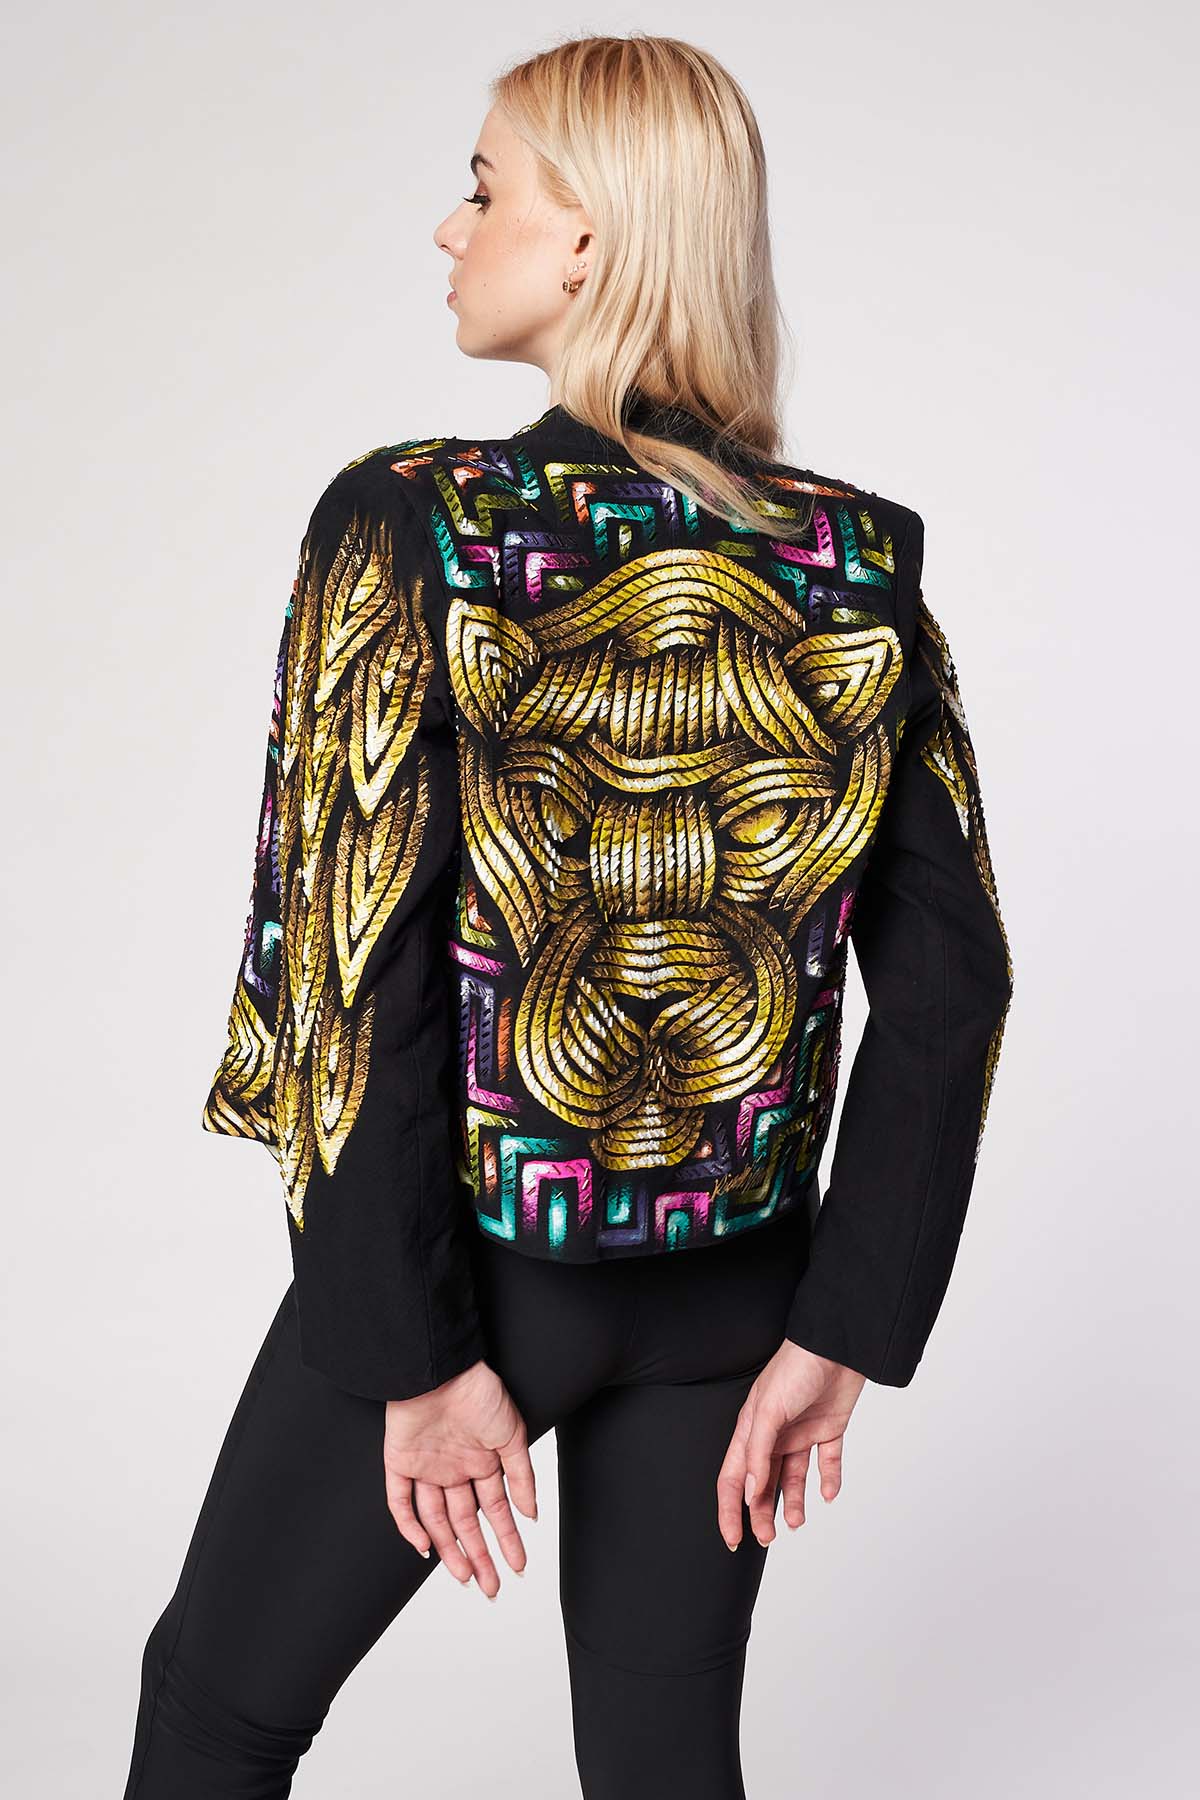 HAND-PAINTED AND HAND-EMBROIDERED JACKET - PREHISPANICO COLOR